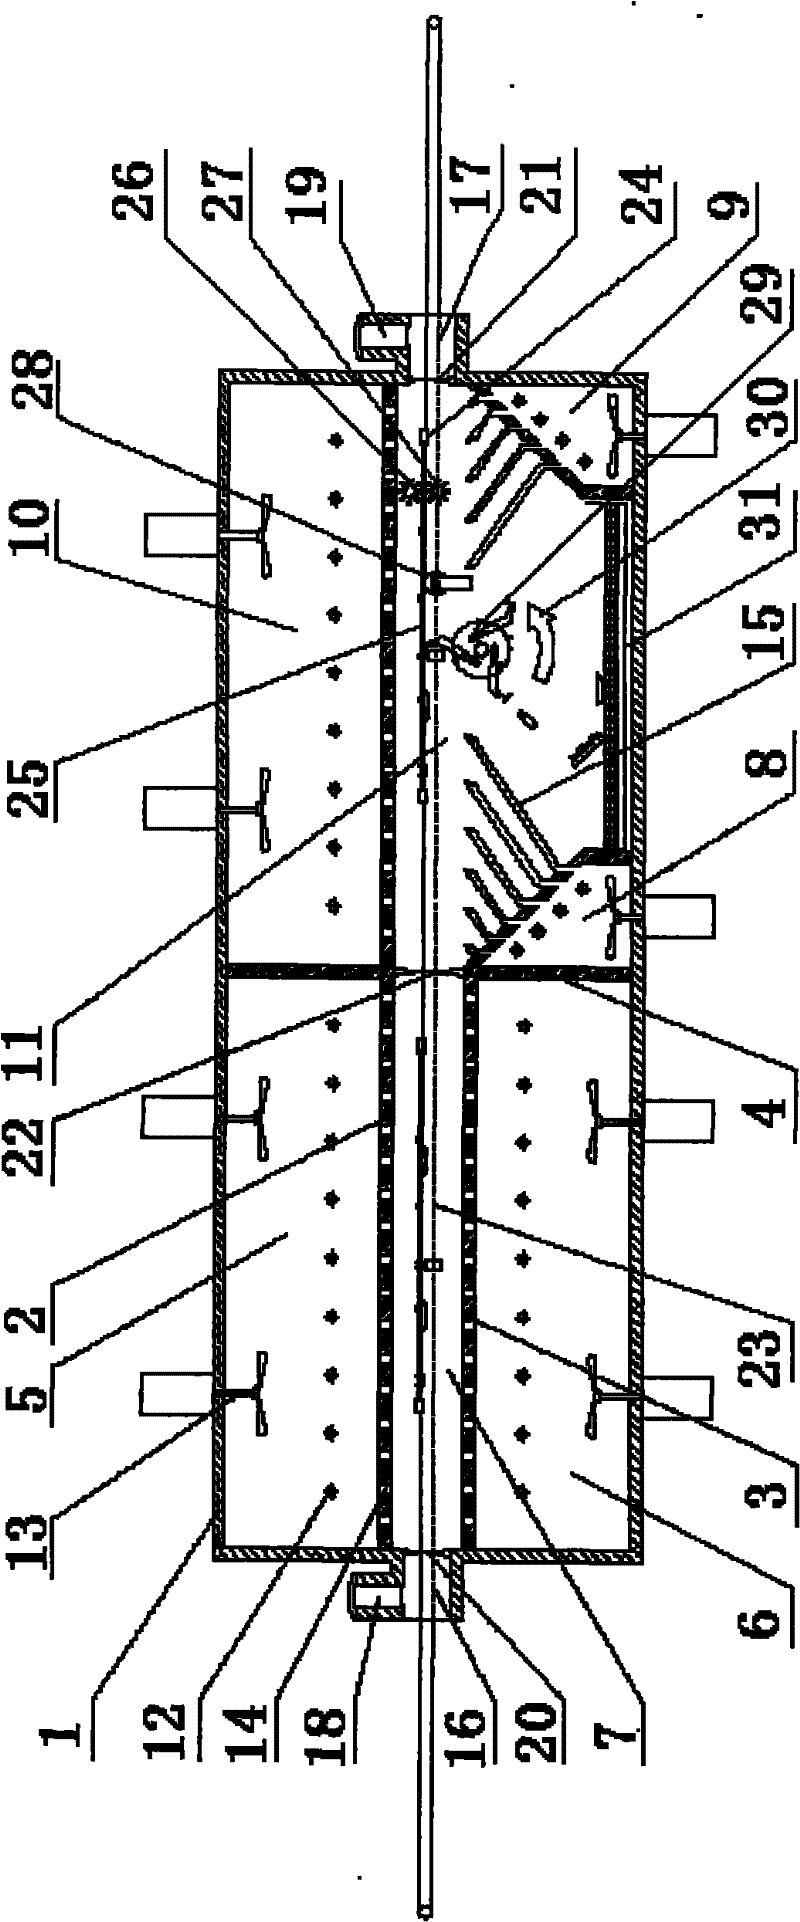 Waste circuit board hook pulling and dismounting device